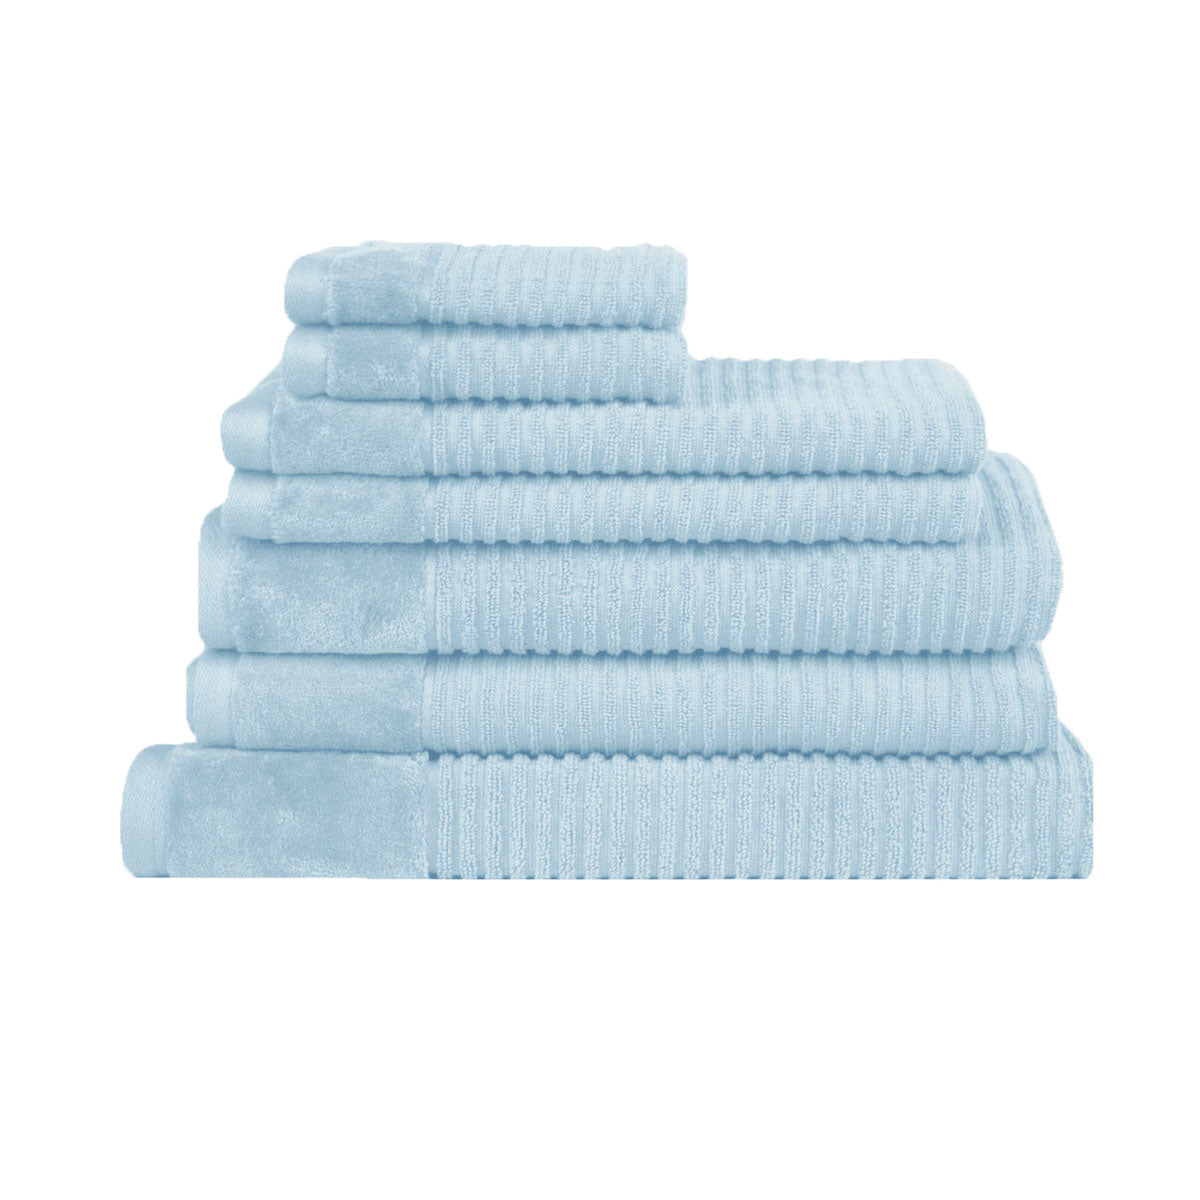 Royal Excellency 7 Piece Cotton Bath Towel Set - Baby Blue - SILBERSHELL